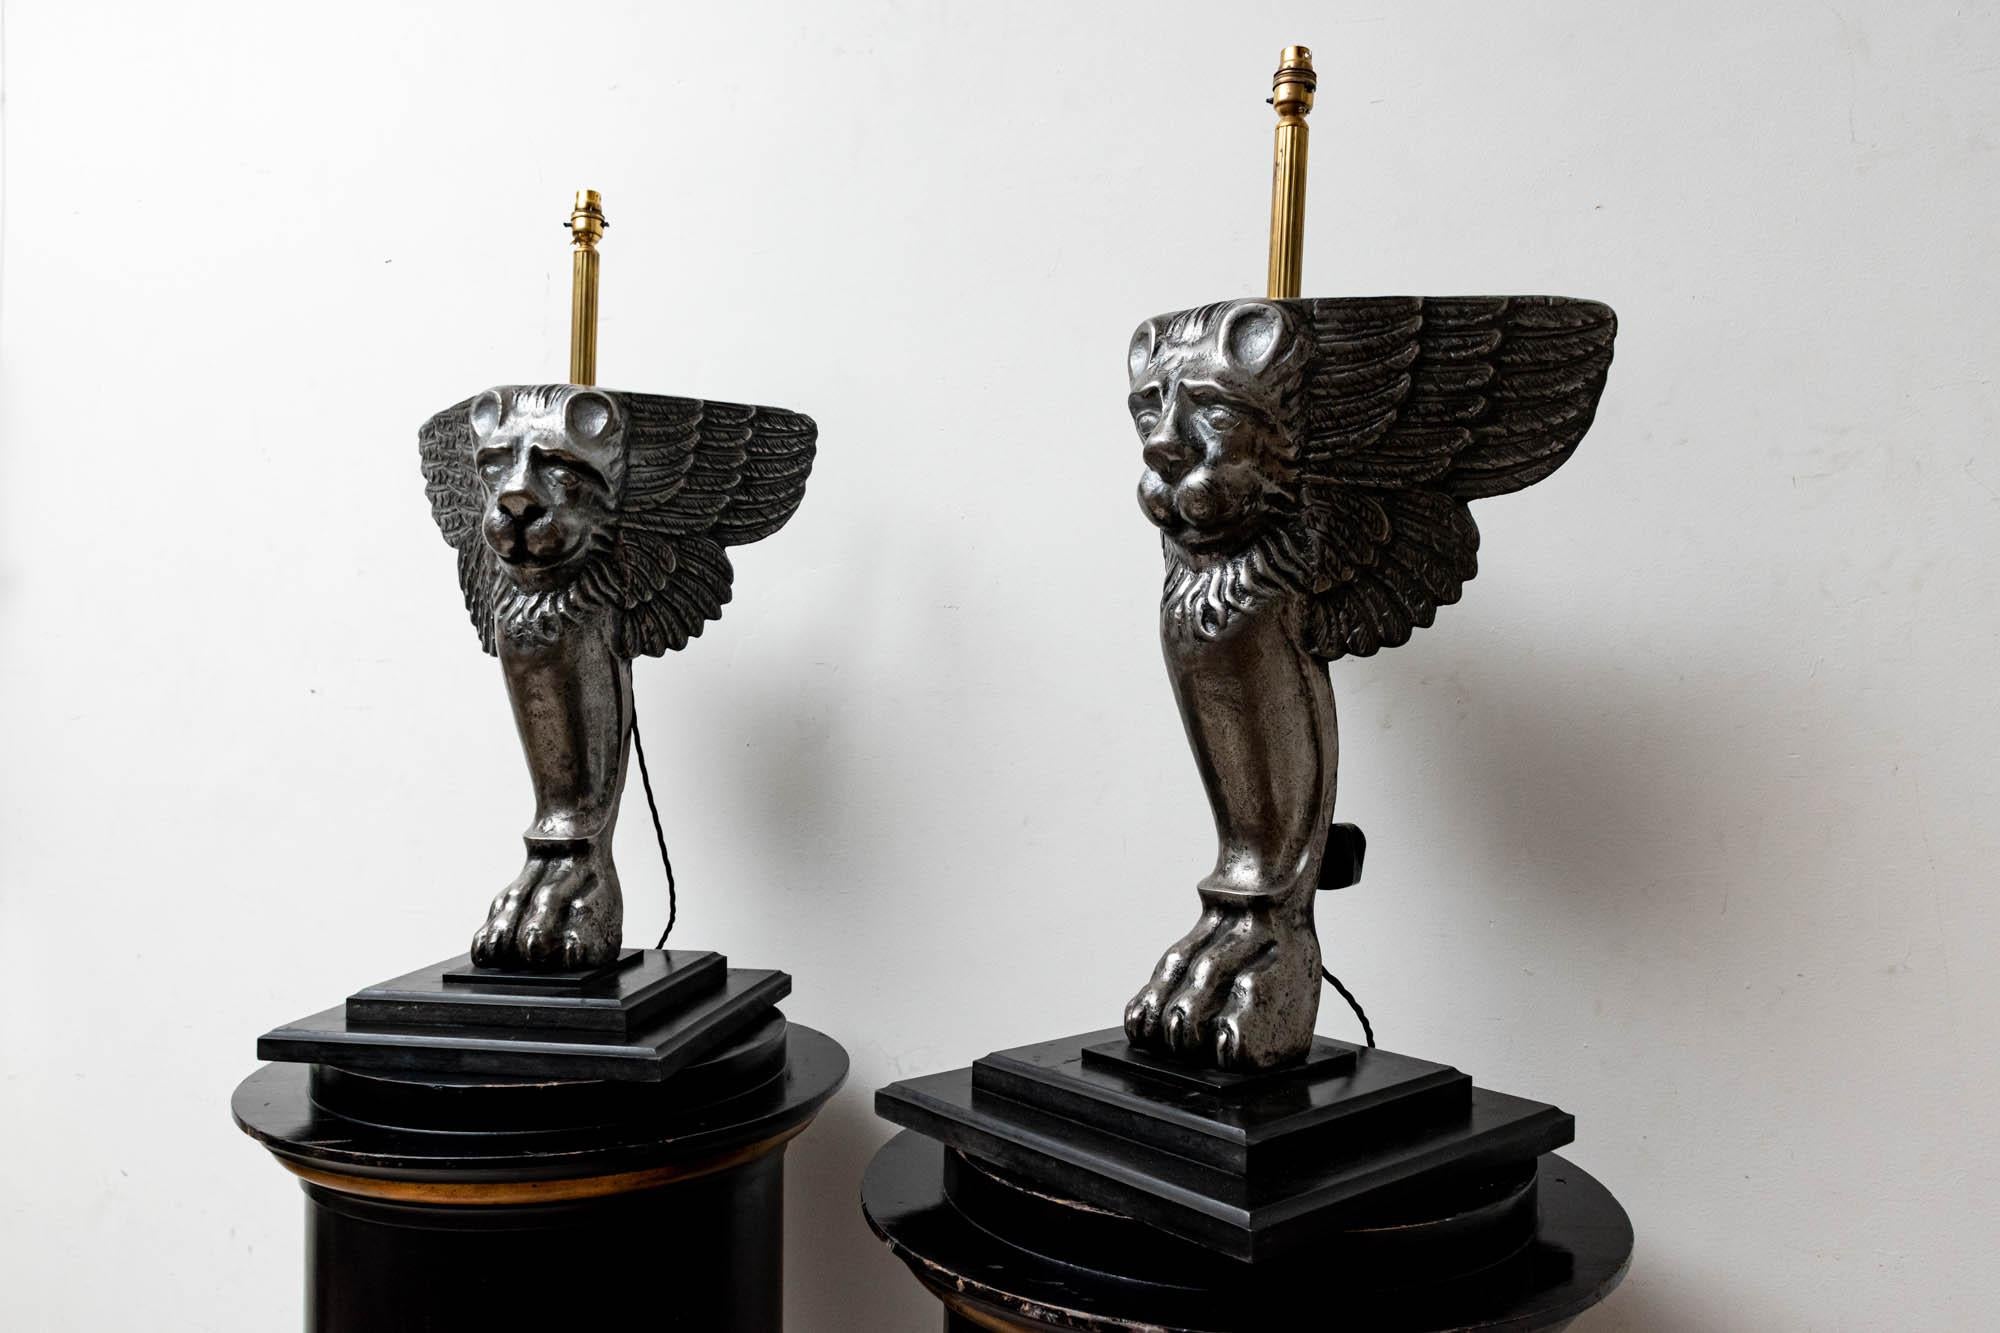 19th century pair of Italian cast iron griffin 'Winged Lion' table lamps which have been converted professionally to lights in the workshop, and mounted on stepped ebonised bases. The Lion of Venice is an ancient symbol which has come to symbolize